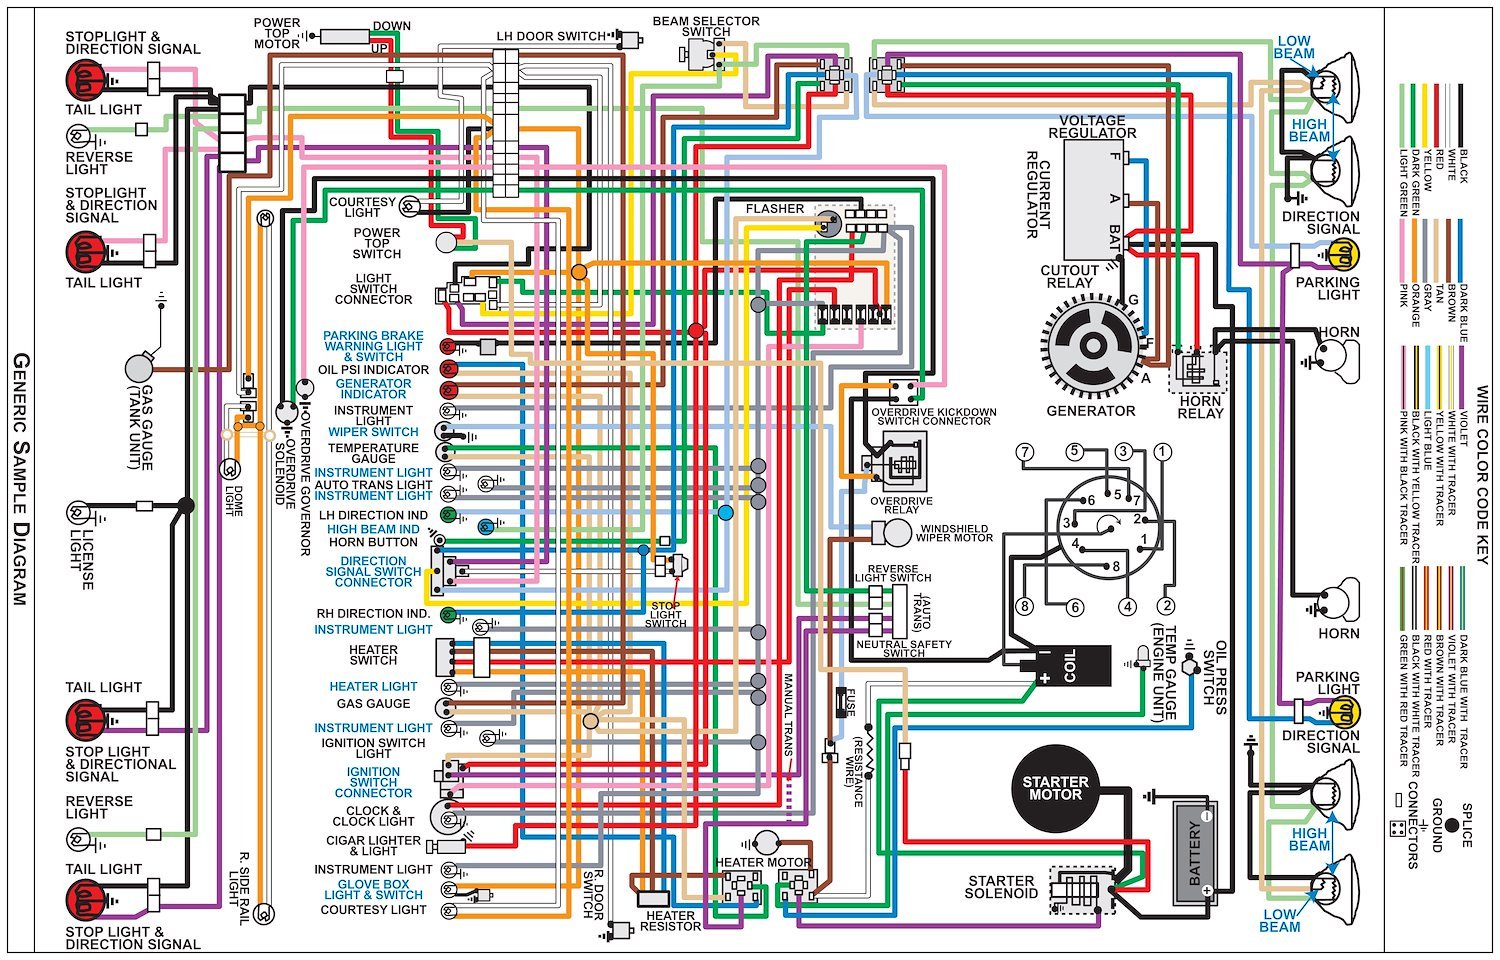 Wiring Diagram for 1969 Dodge Charger (All Models), 11 in x 17 in., Laminated